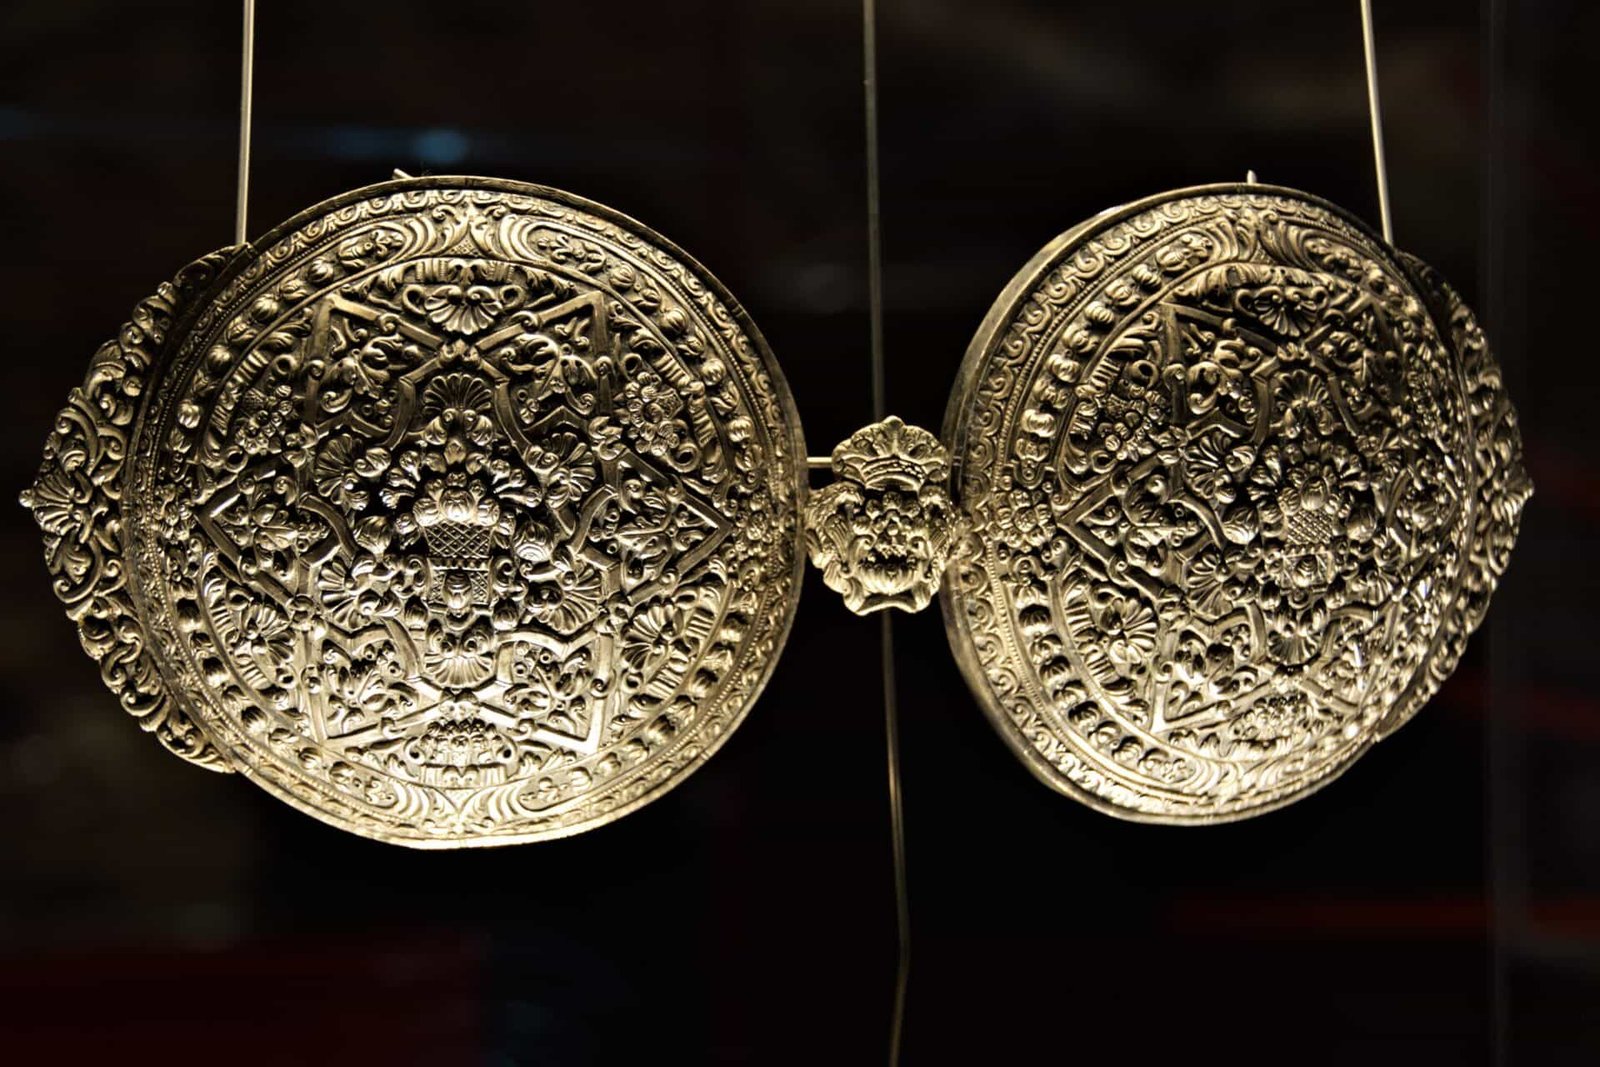 richly decorated silver belt buckle made of two large round pieces joind together in the middle by a smaller piece